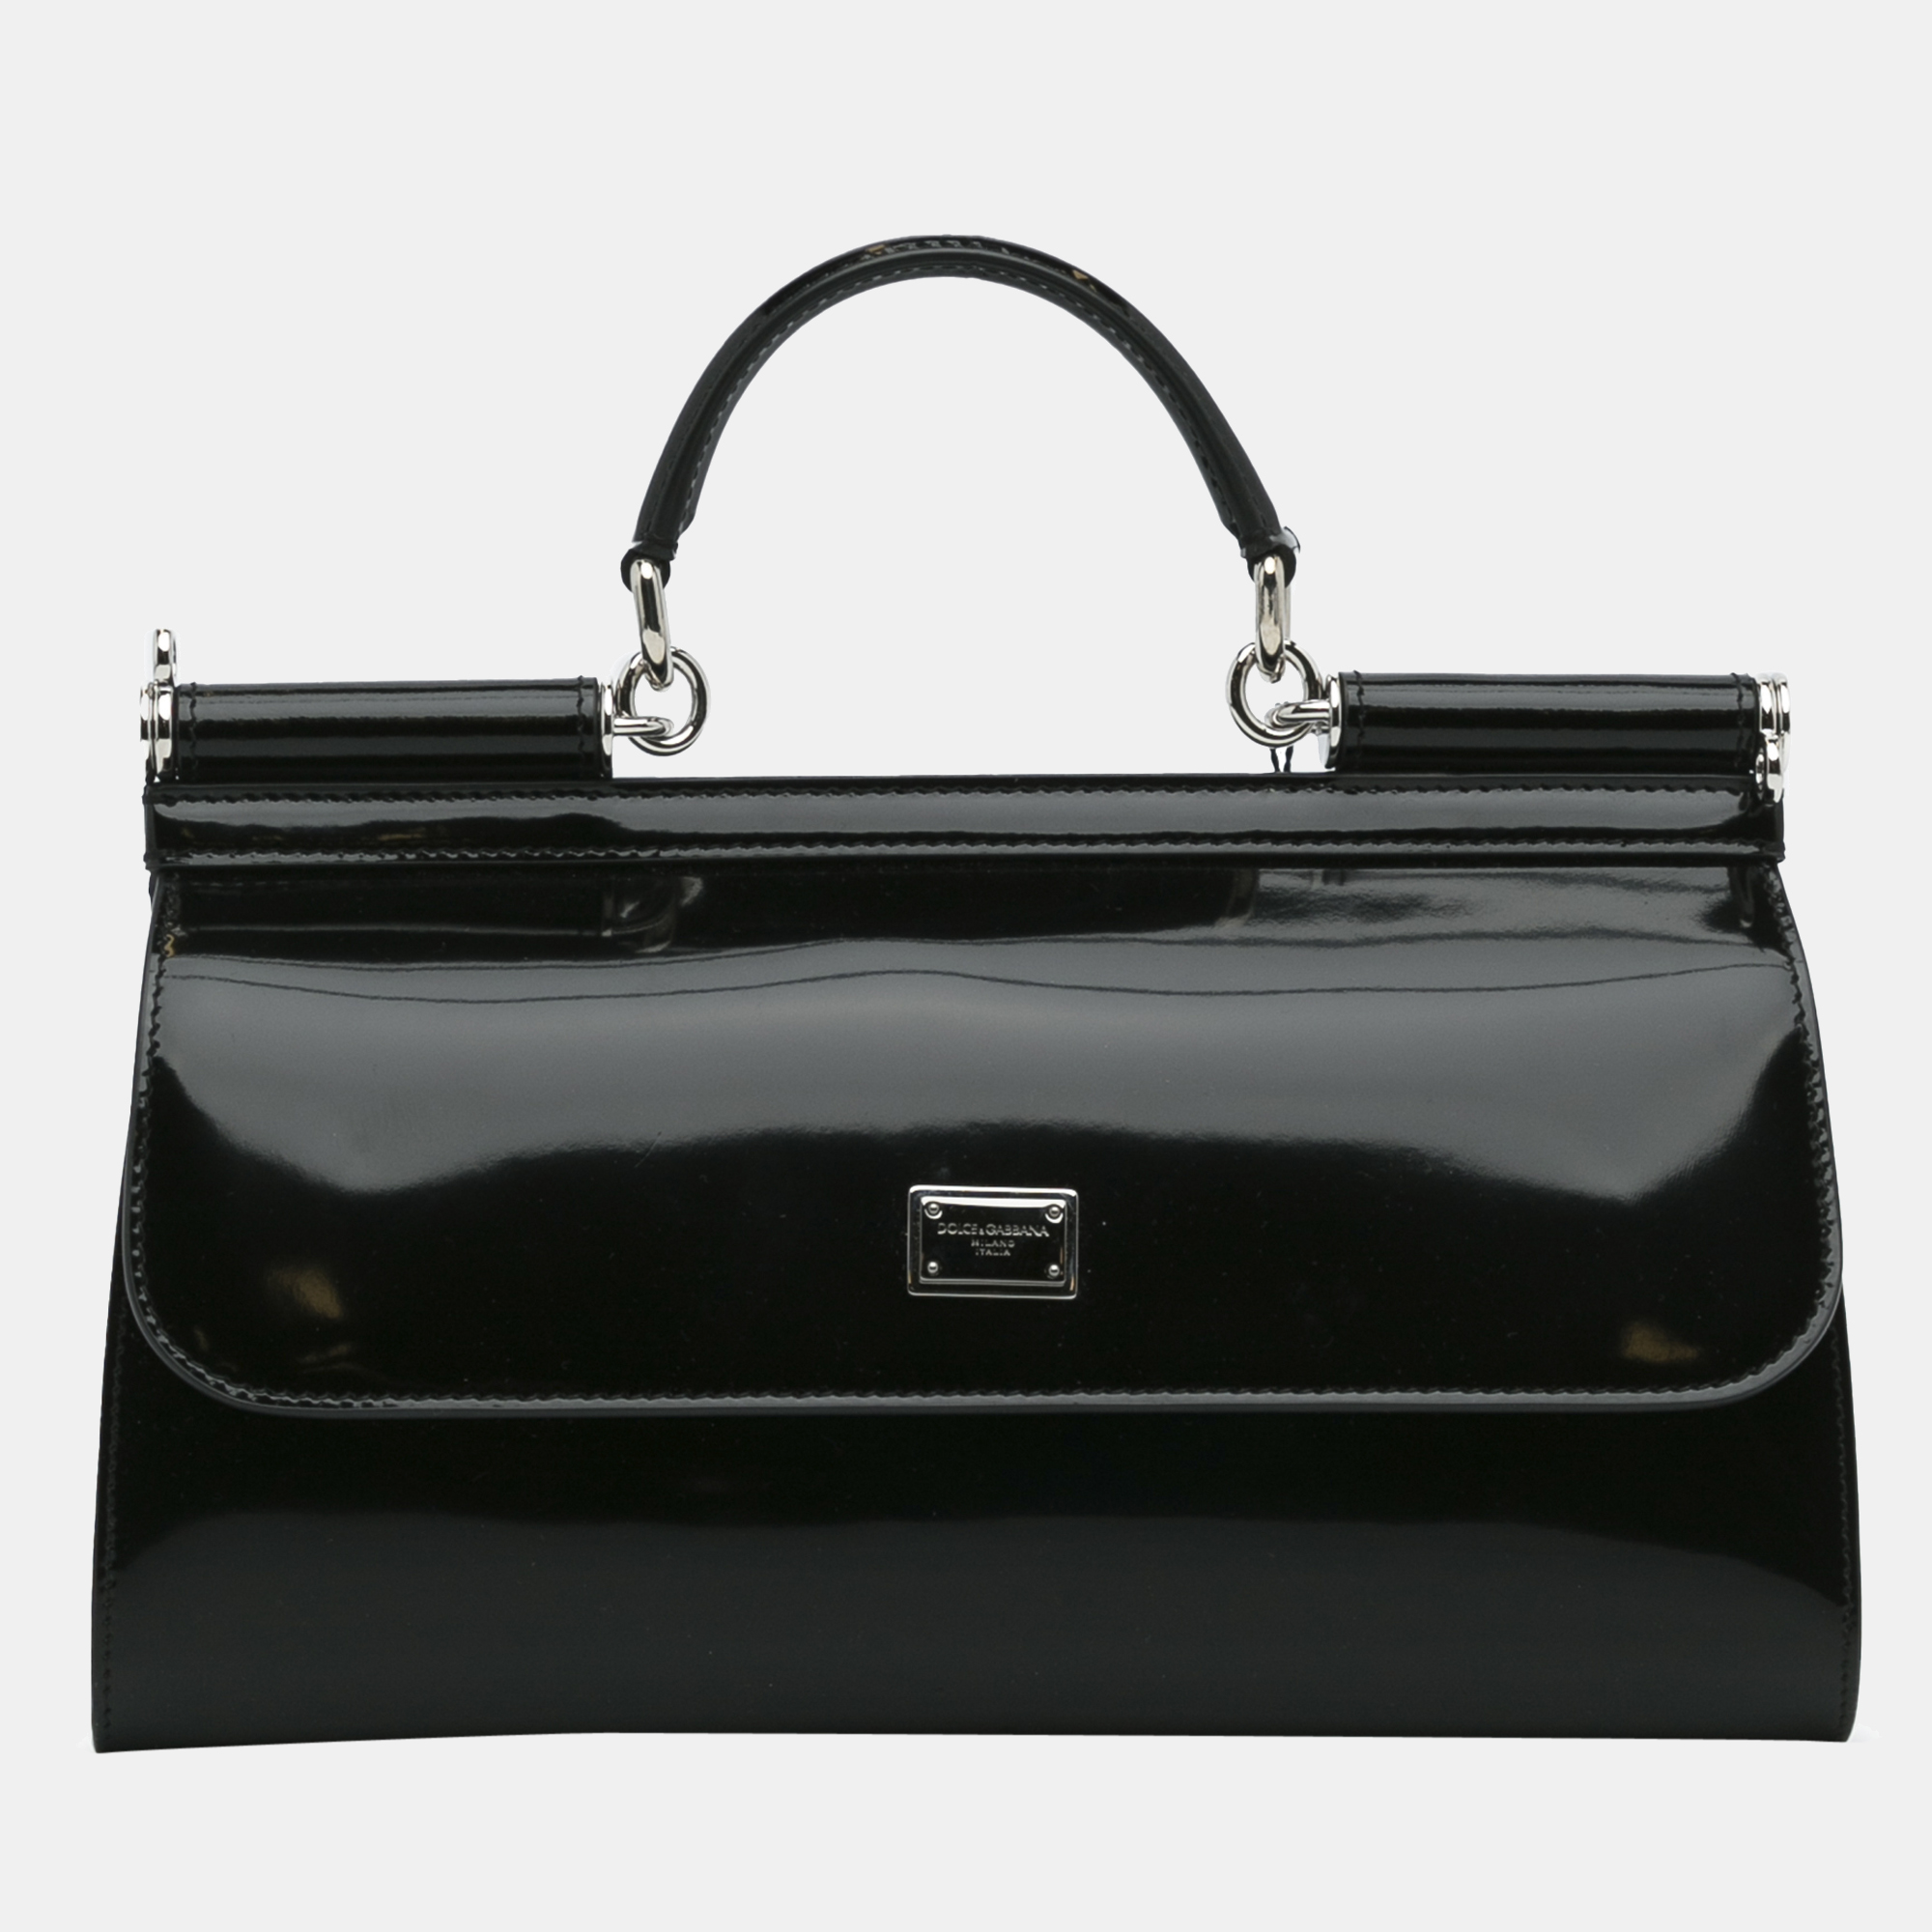 Pre-owned Dolce & Gabbana Black Miss Sicily Patent Leather Satchel